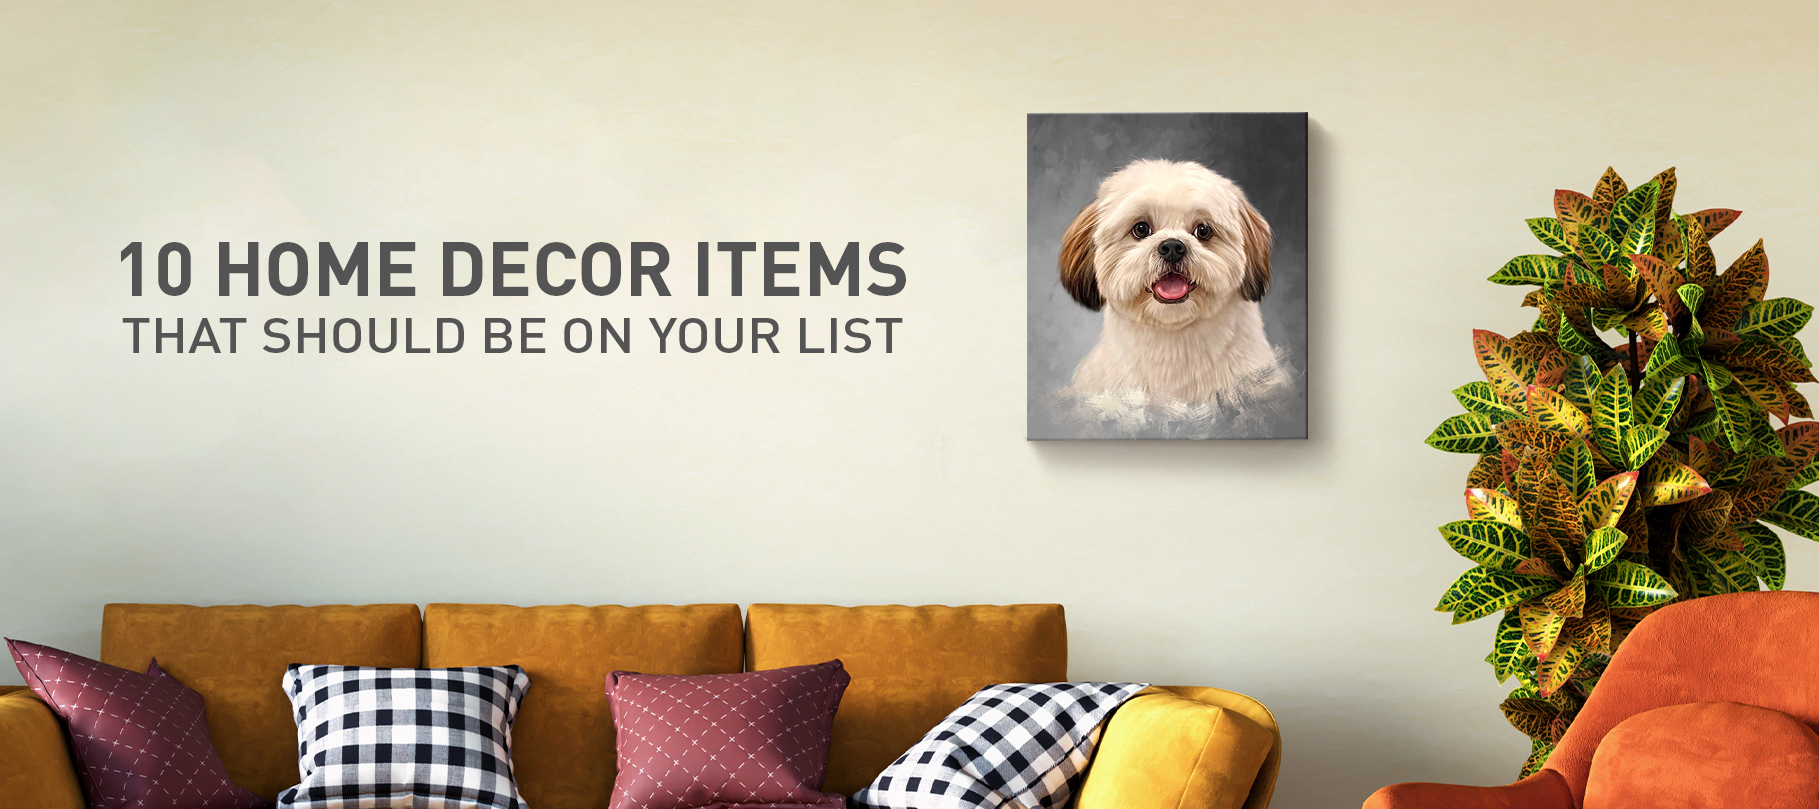 10 home decor items that should be on your list